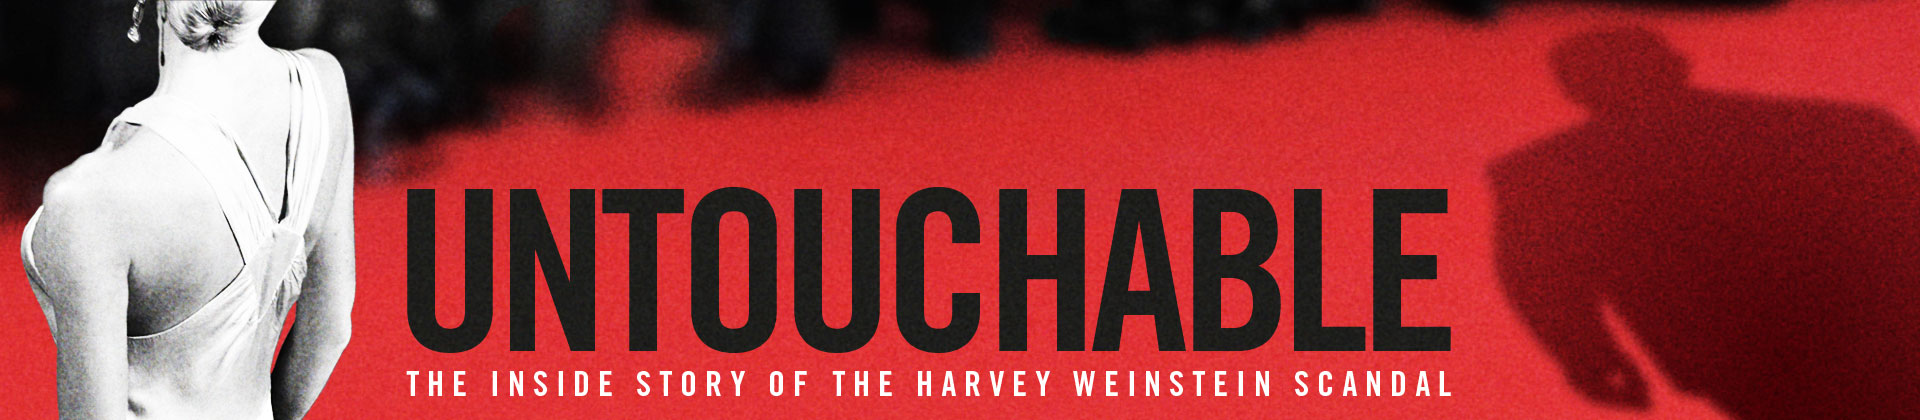 Untouchable - The inside story of the Harvey Weinstein scandal